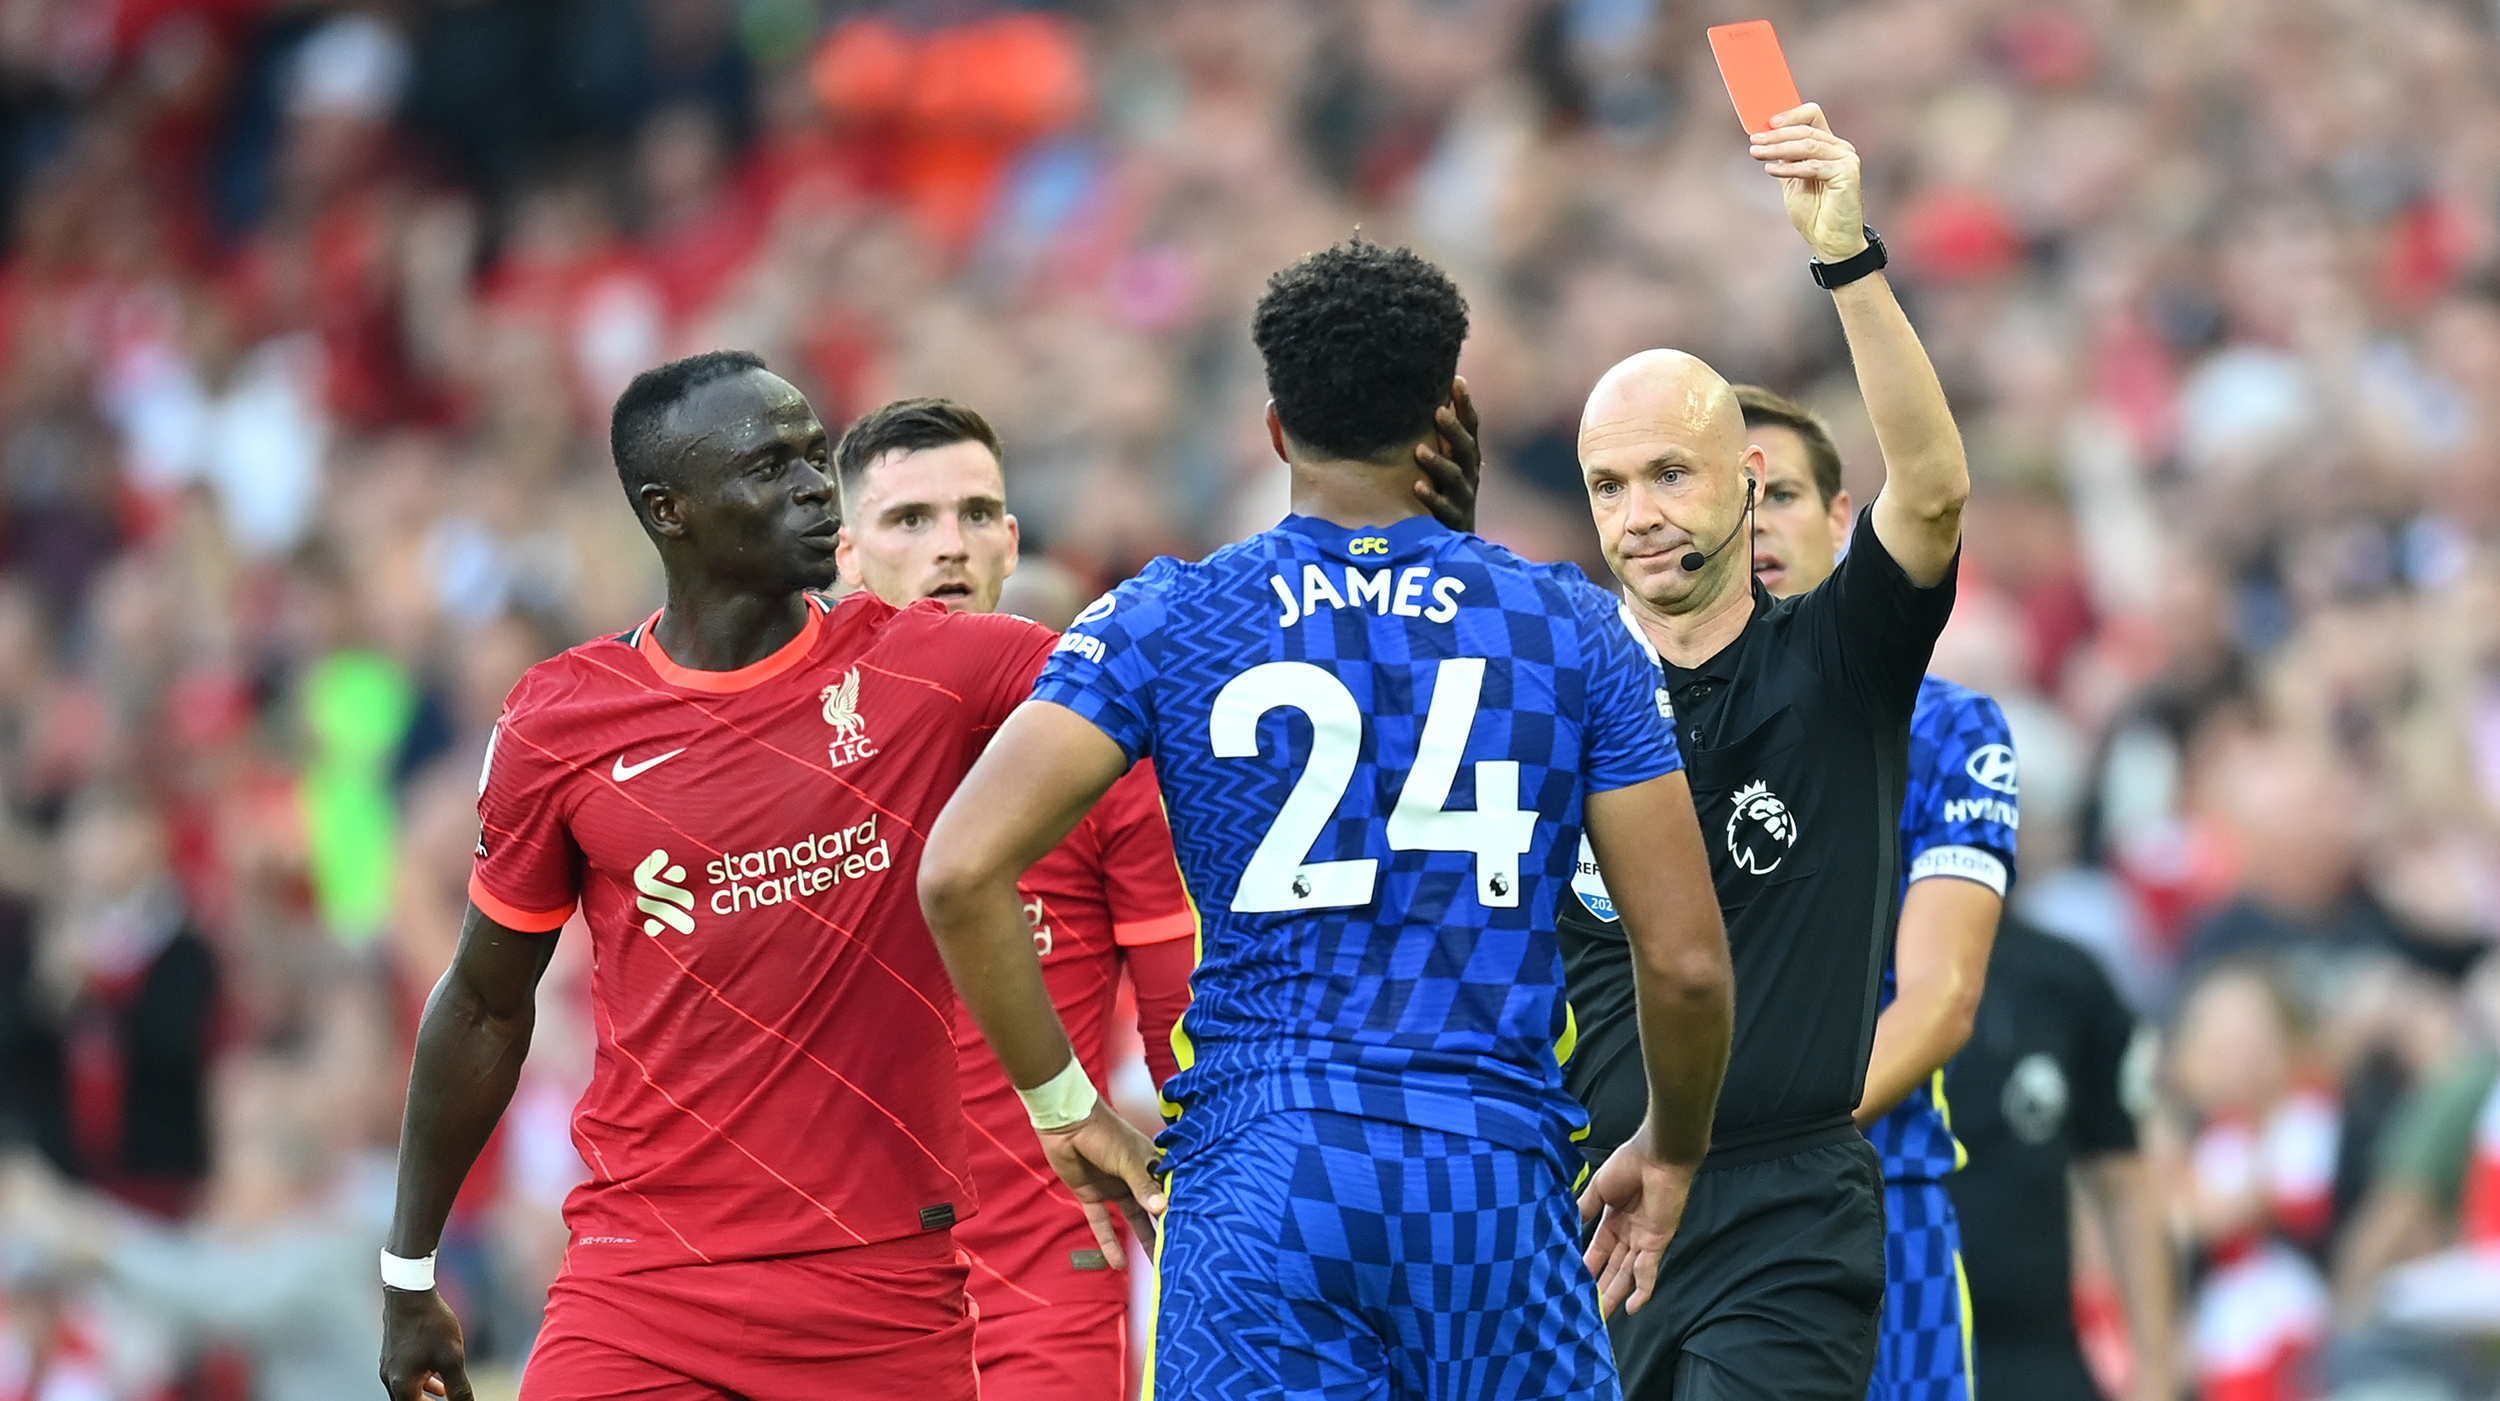 Reece James of Chelsea is shown a Red Card by Match Referee Anthony Taylor during the Premier League match between Liverpool and Chelsea at Anfield on August 28, 2021 in Liverpool, England.